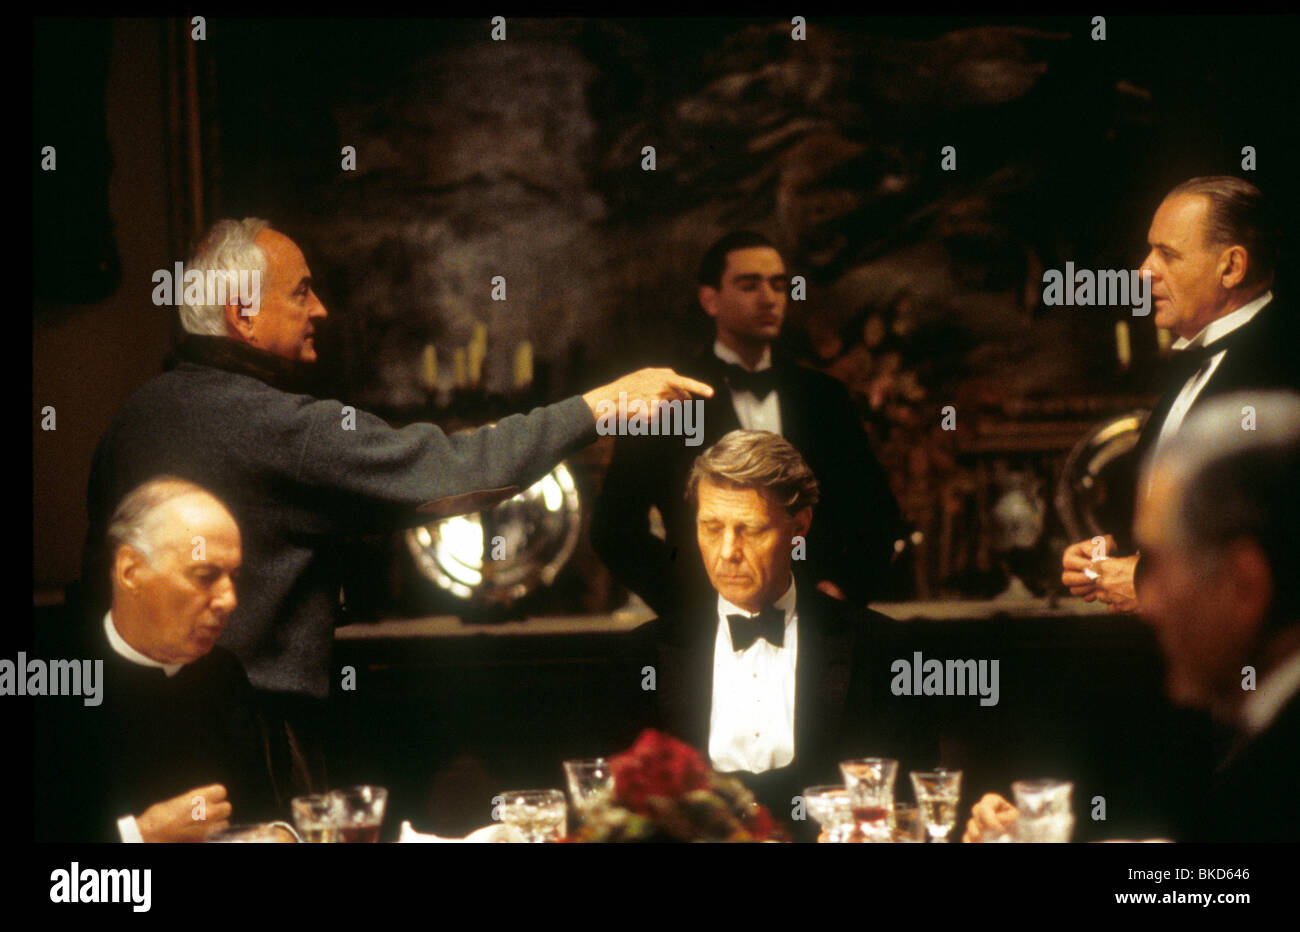 JAMES IVORY (DIR) O/S 'REMAINS OF THE DAY' (1993), WITH JAMES FOX, ANTHONY HOPKINS JIVY 005 Stock Photo